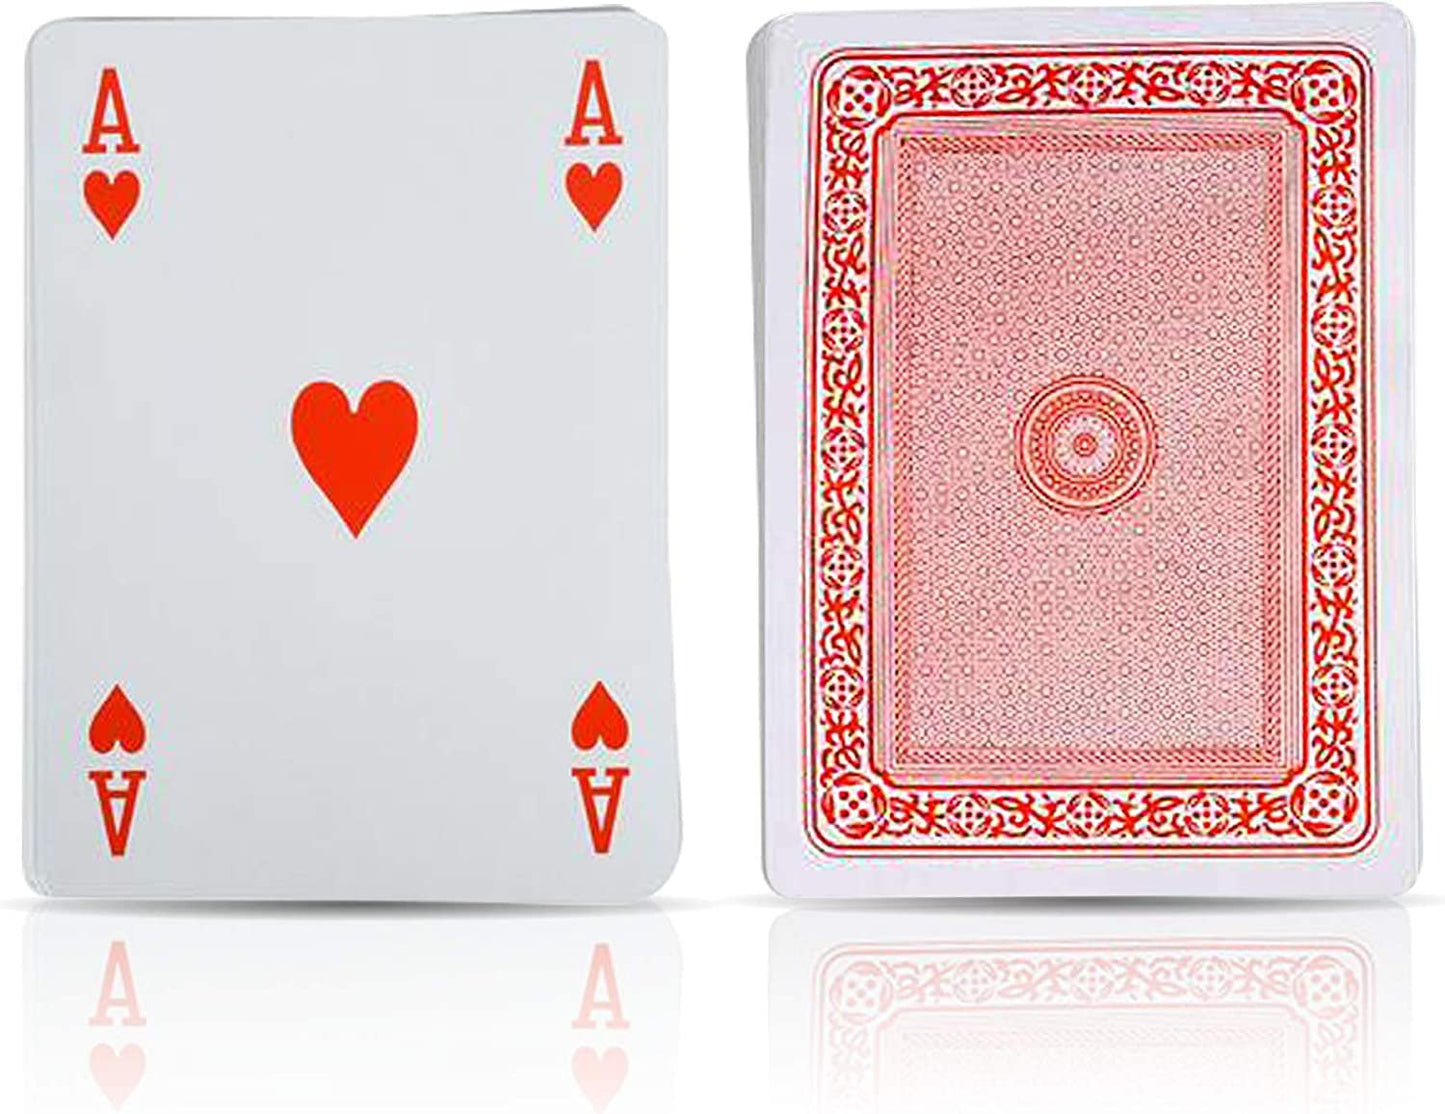 Giant 5 X 7 Inch Playing Cards by Gamie - Pack of 2 - Oversized Super Big Poker Card Set - Huge Casino Game Cards for Kids, Men, Women and Seniors - Great Novelty Gift Idea